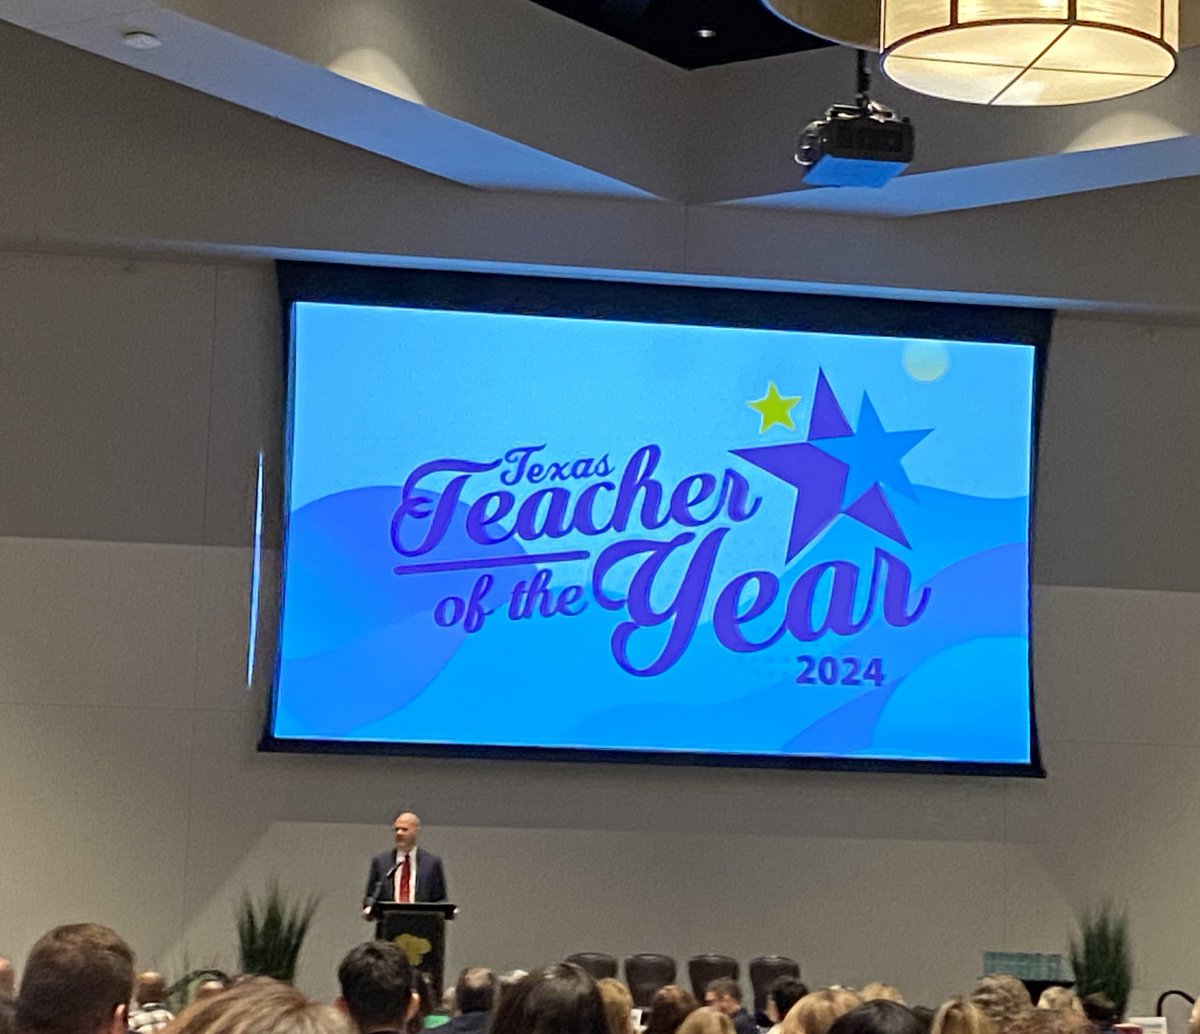 I’m filling my teacher heart listening to some very inspirational stories about #TxEd educators at today’s @tasanet #TXTOY Luncheon! #PublicSchoolProud